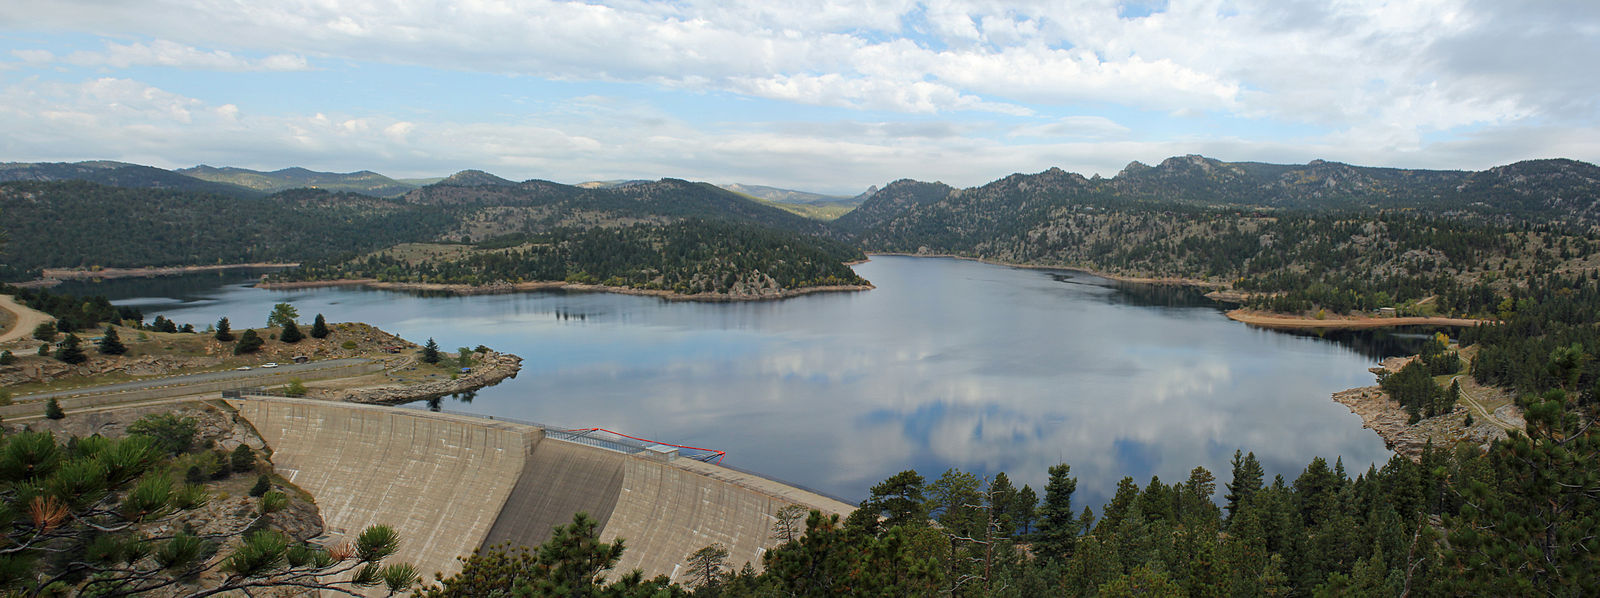 Gross Reservoir in Boulder County, Colorado. The reservoir is owned by Denver Water. Photo by Jeffrey Beall